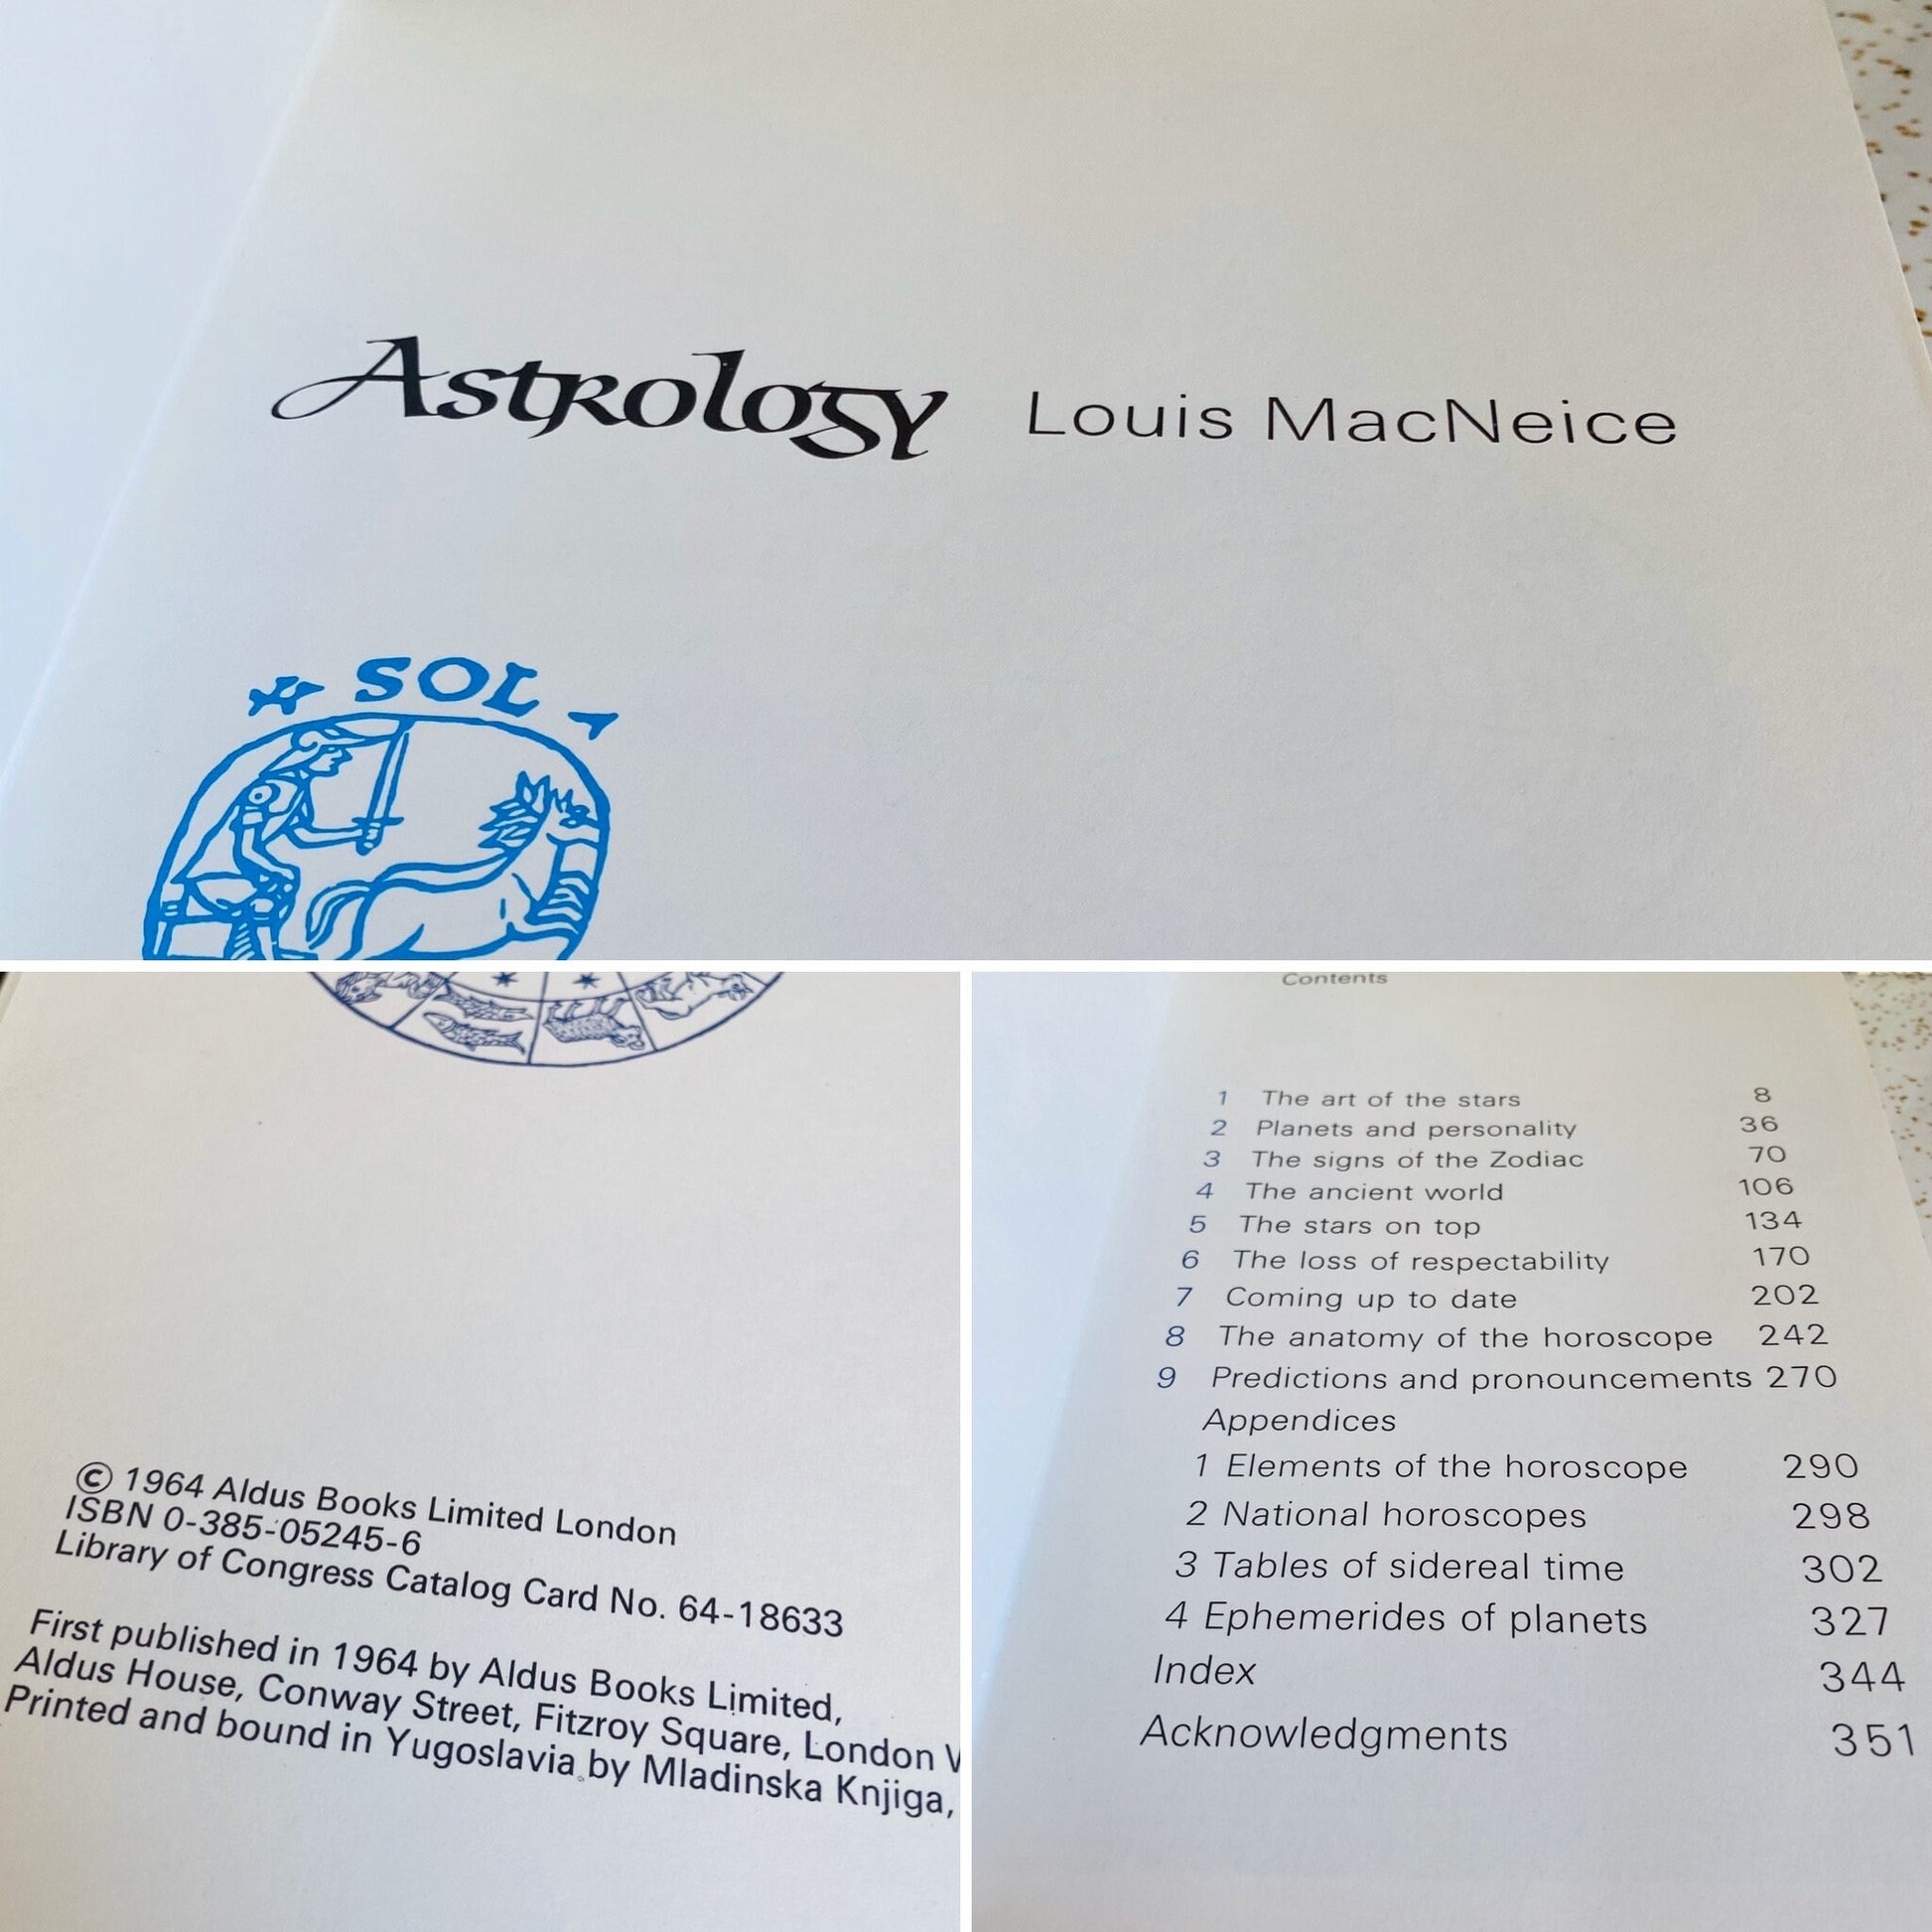 Vintage 1964 Astrology book by Louis MacNeice. Retro 60s hardcover zodiac guide book. Gift for occult book collector. New age spirituality.